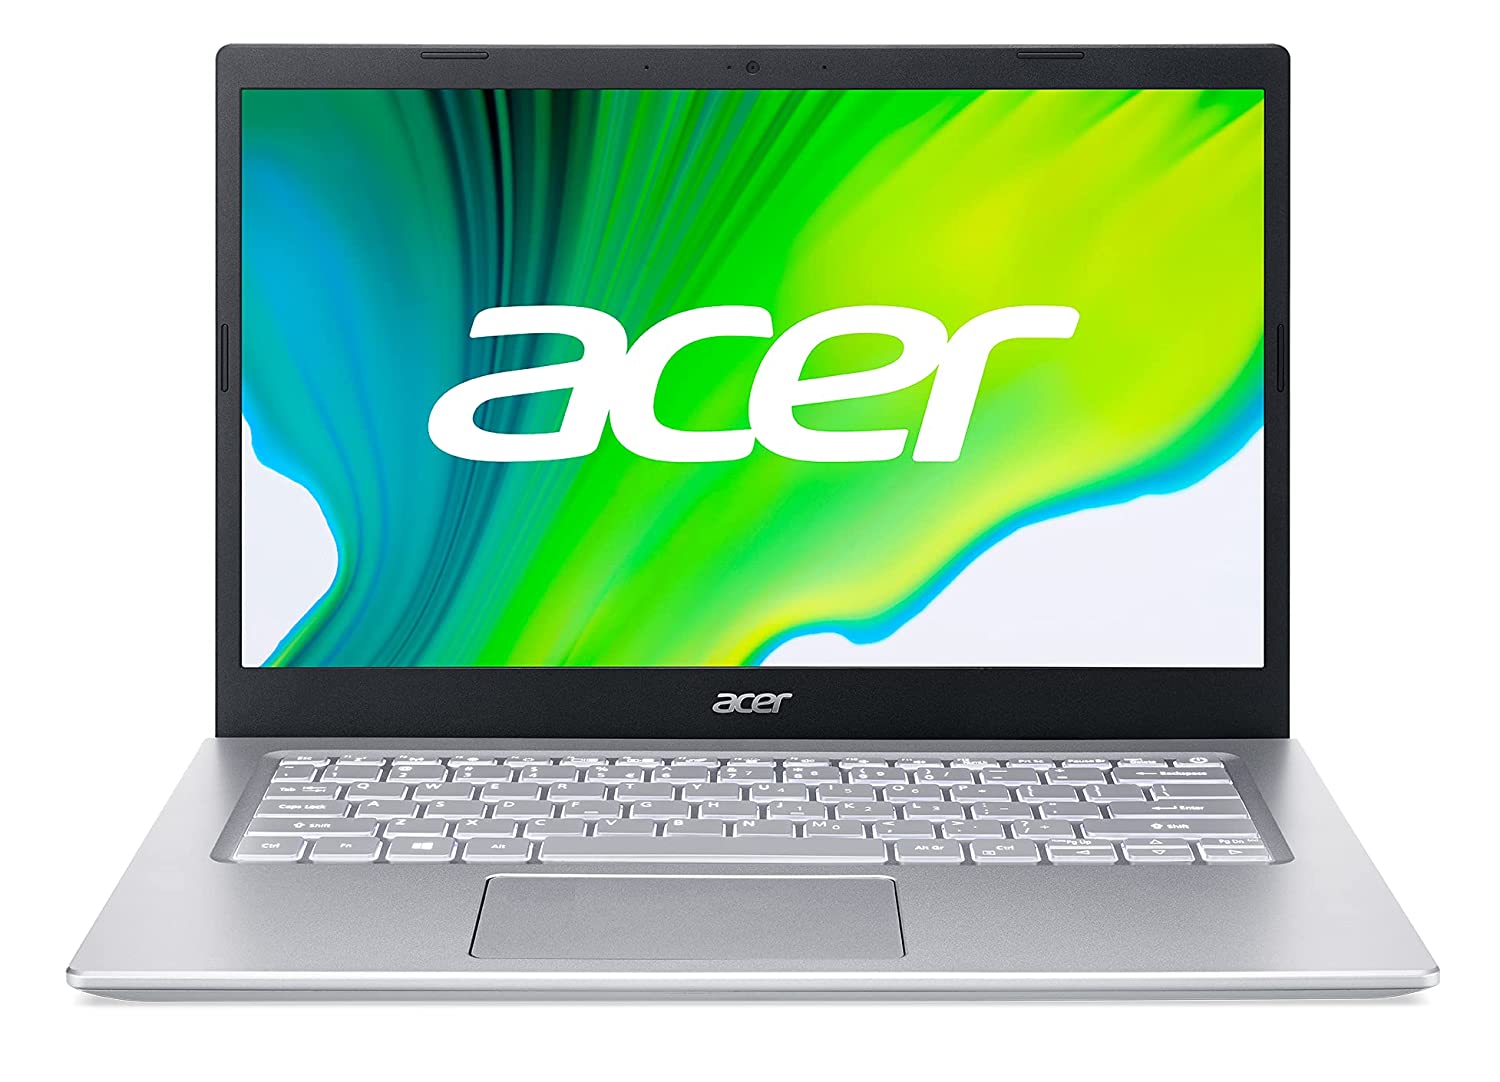 Acer Aspire 5 Intel Core i3 11th Generation 14-inch (35.56 cms) Thin and Light Laptop